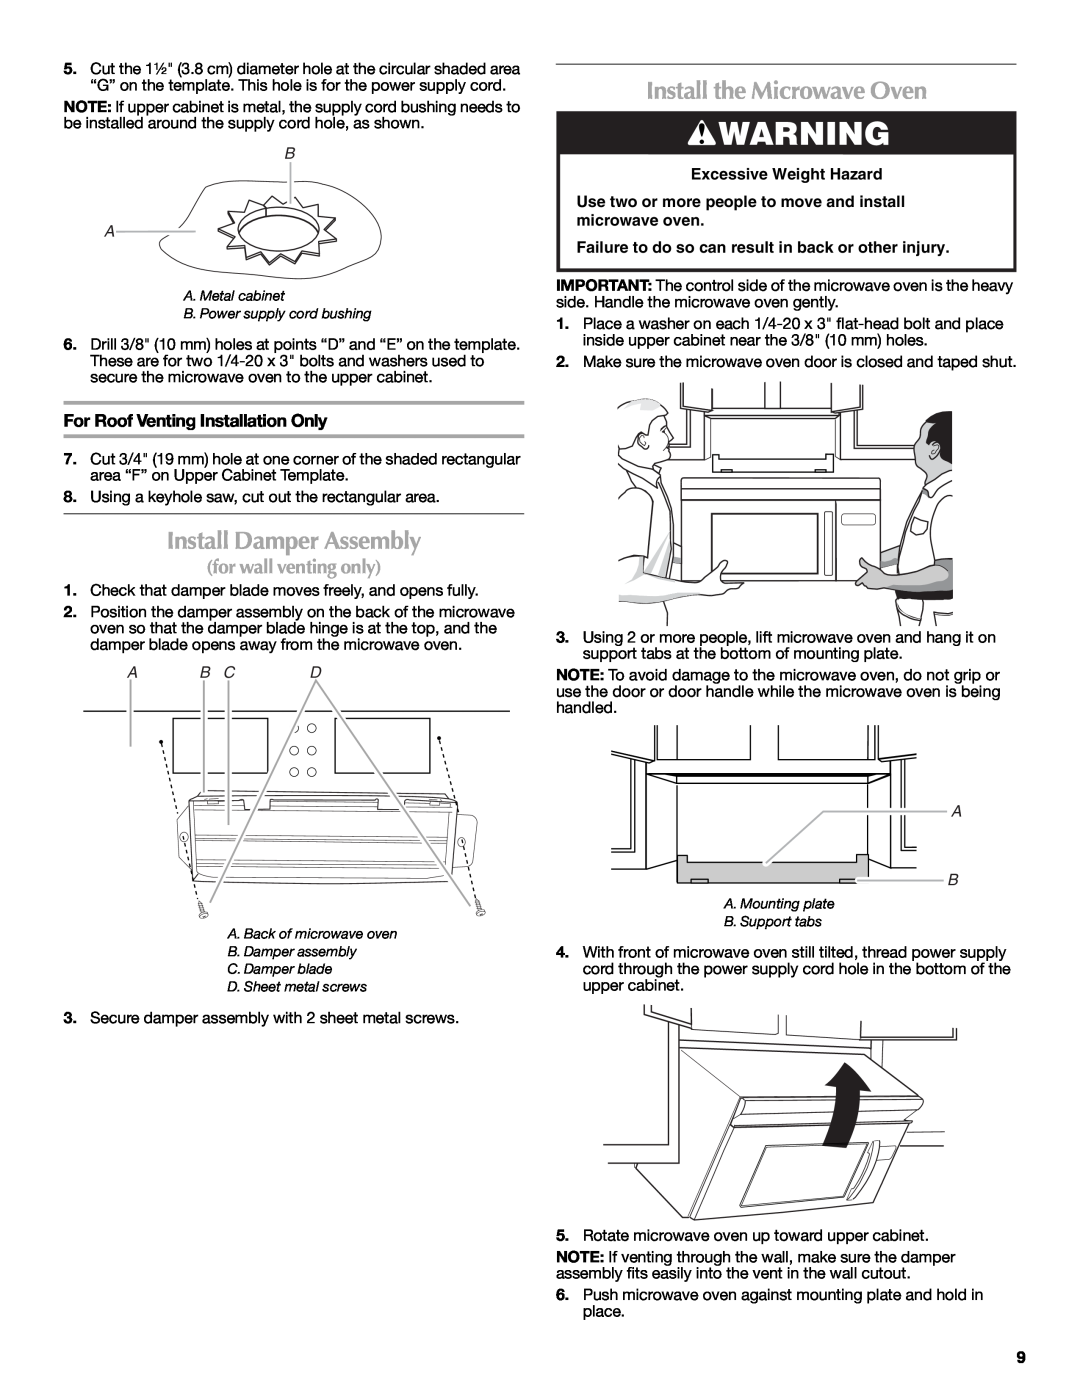 Maytag MMV5208WS Install Damper Assembly, Install the Microwave Oven, For Roof Venting Installation Only, A B Cd 